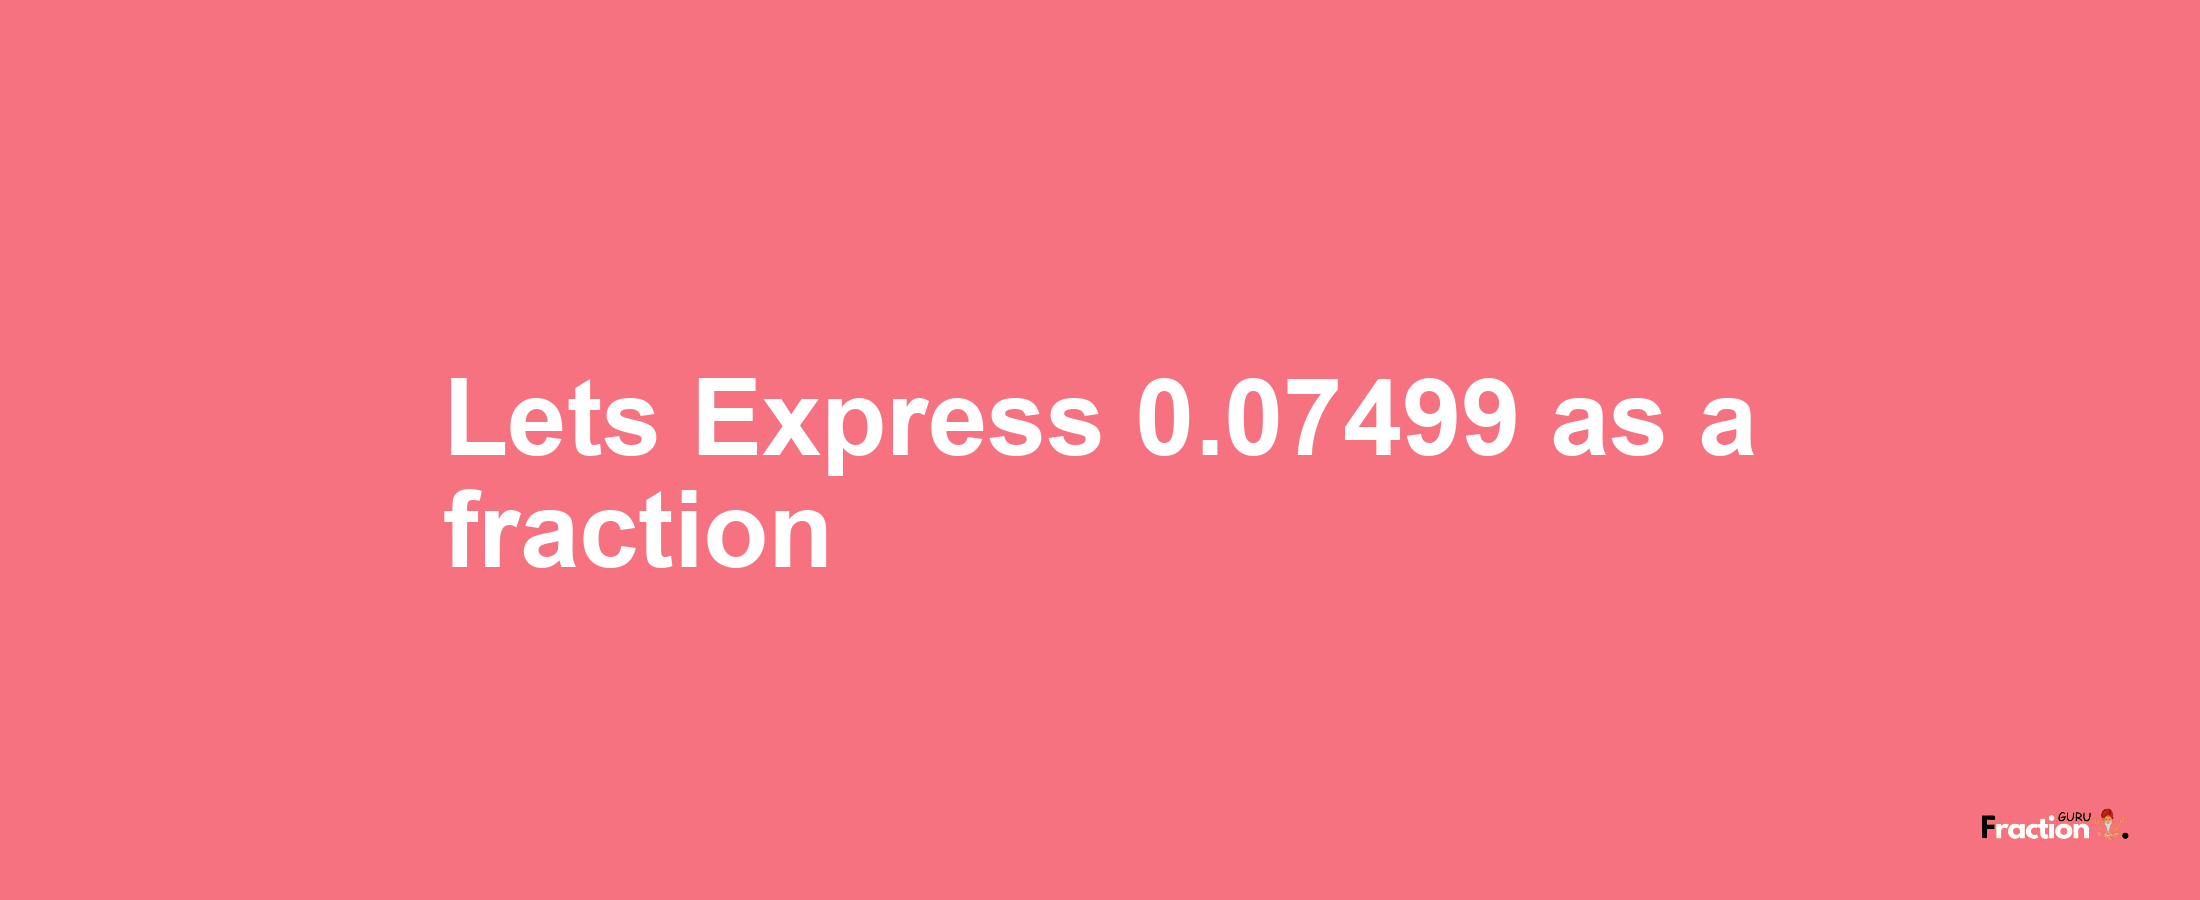 Lets Express 0.07499 as afraction